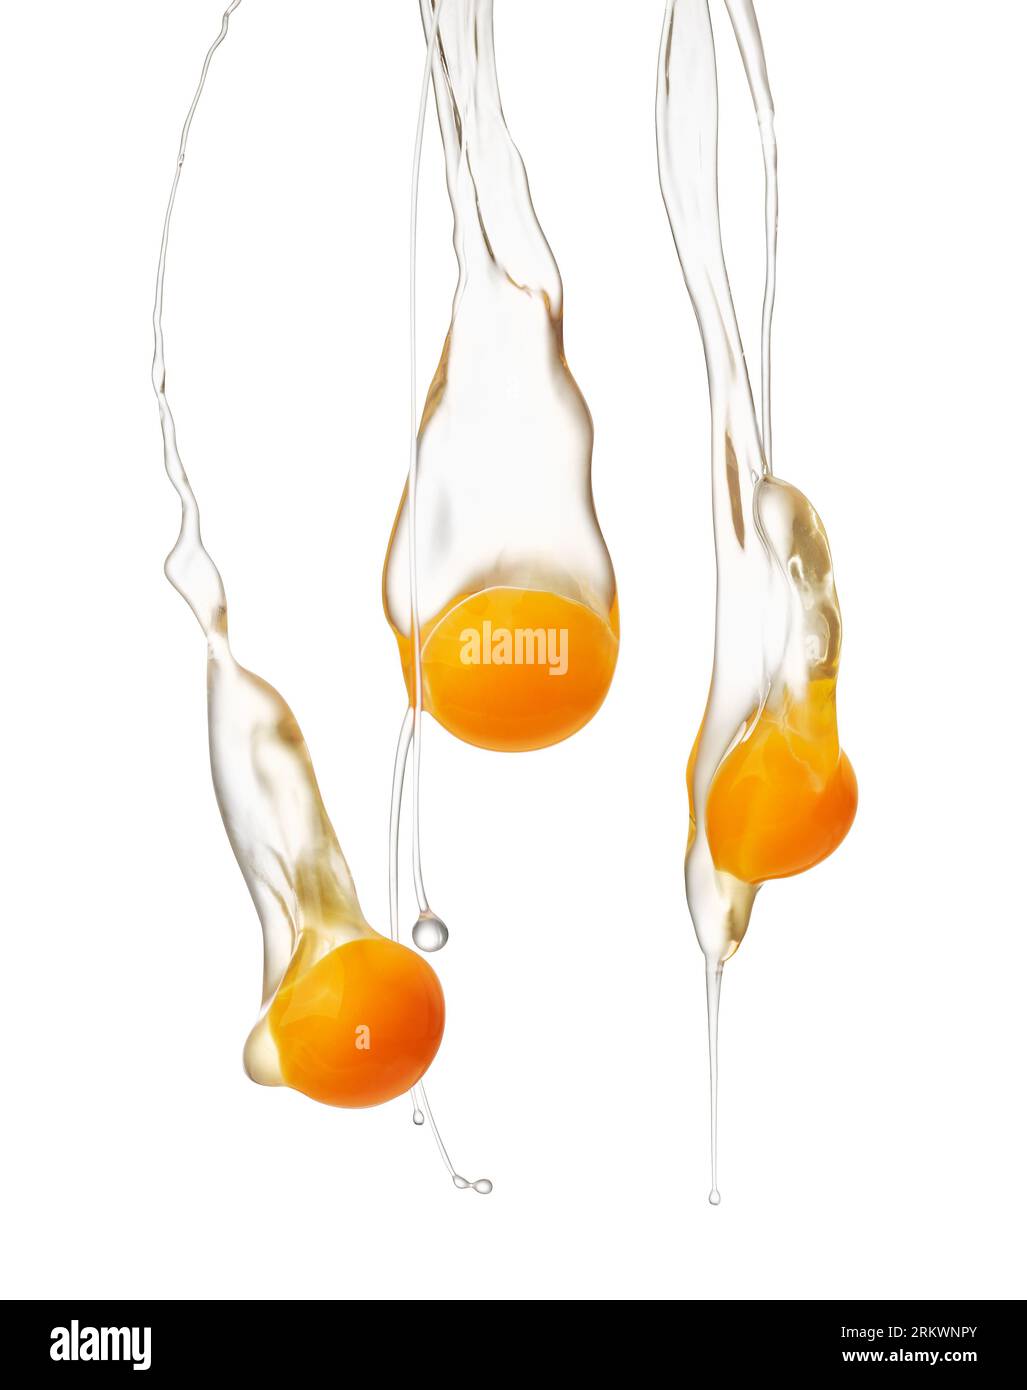 Egg yolk and white falling down over white background Stock Photo